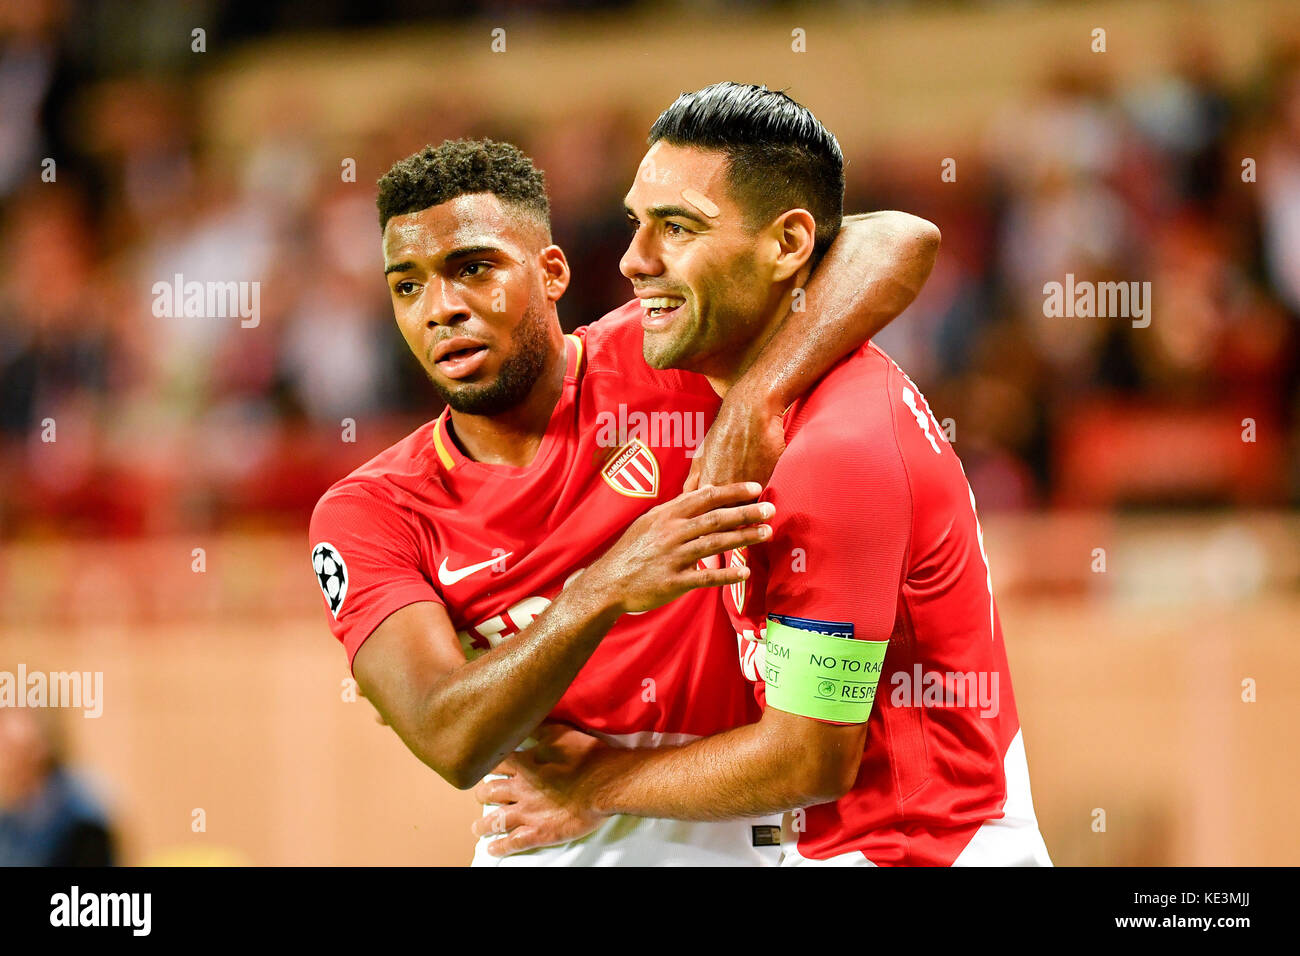 (171018) -- FONTVIEILLE, Oct. 18, 2017 (Xinhua) -- Radamel Falcao (R) of Monaco celebrates with teammate Thomas Lemar after scoring during their match of Group G of 2017-18 Champions League at the Stade de Louis II in Fontvieille, Monaco on Oct. 17, 2017. Monaco was defeated with 1-2. (Xinhua/Chen Yichen) Stock Photo